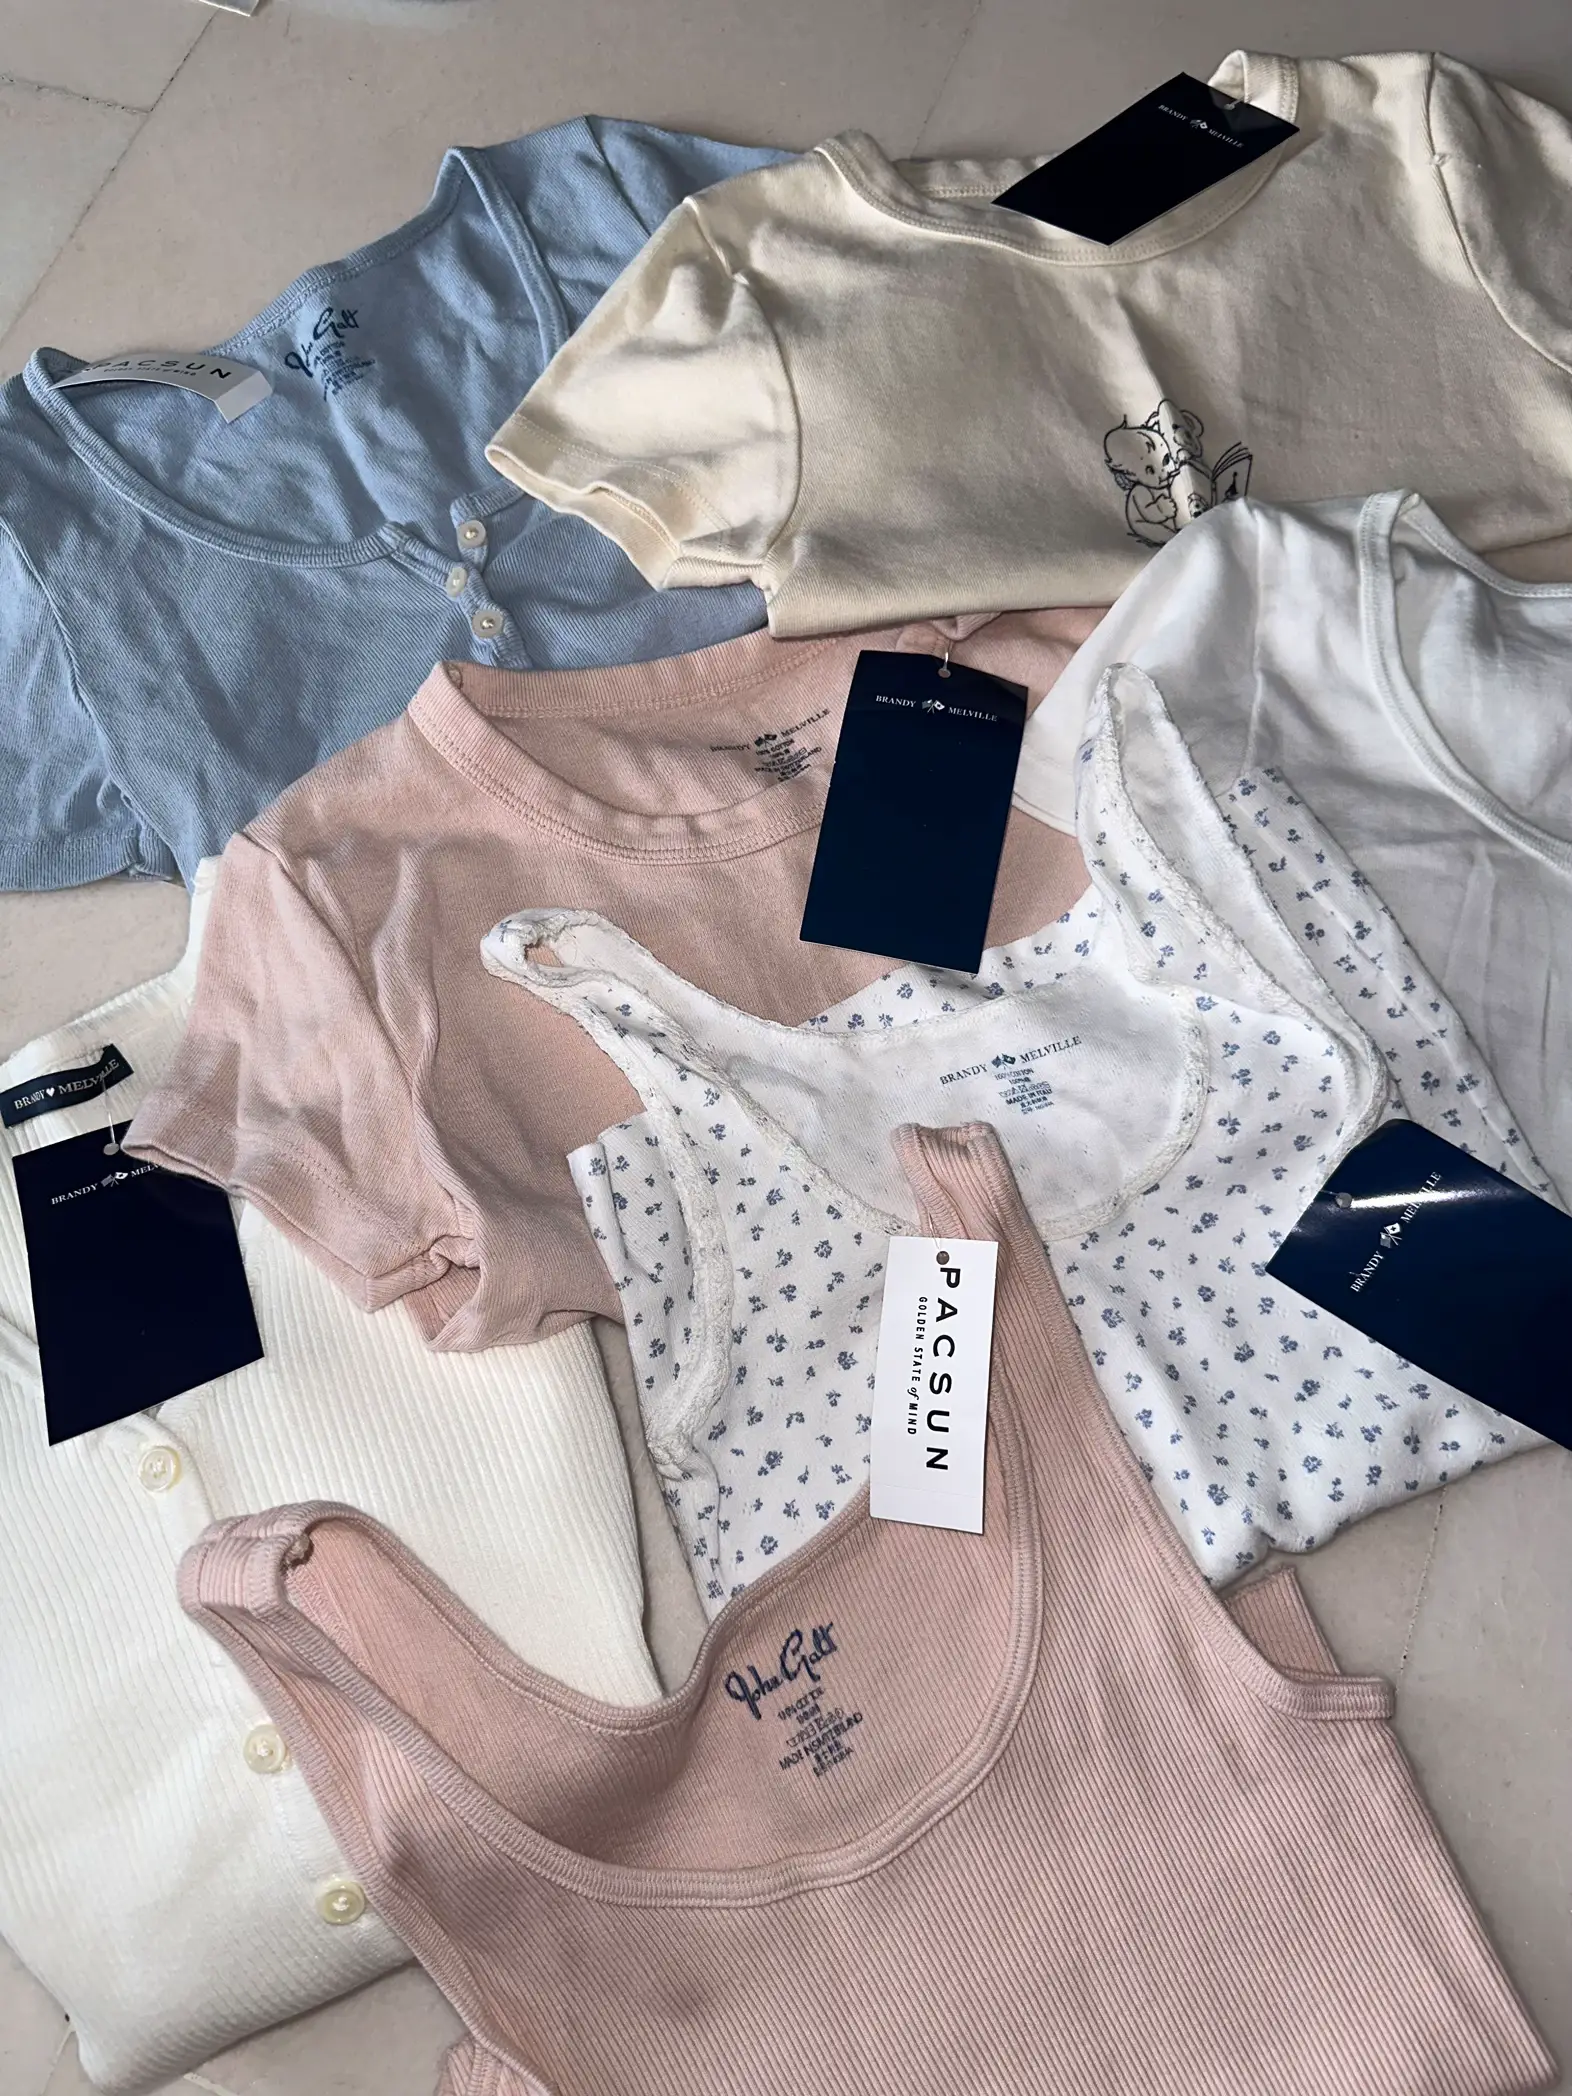 brandy melville haul🇺🇸, Gallery posted by Kathlyn Chow